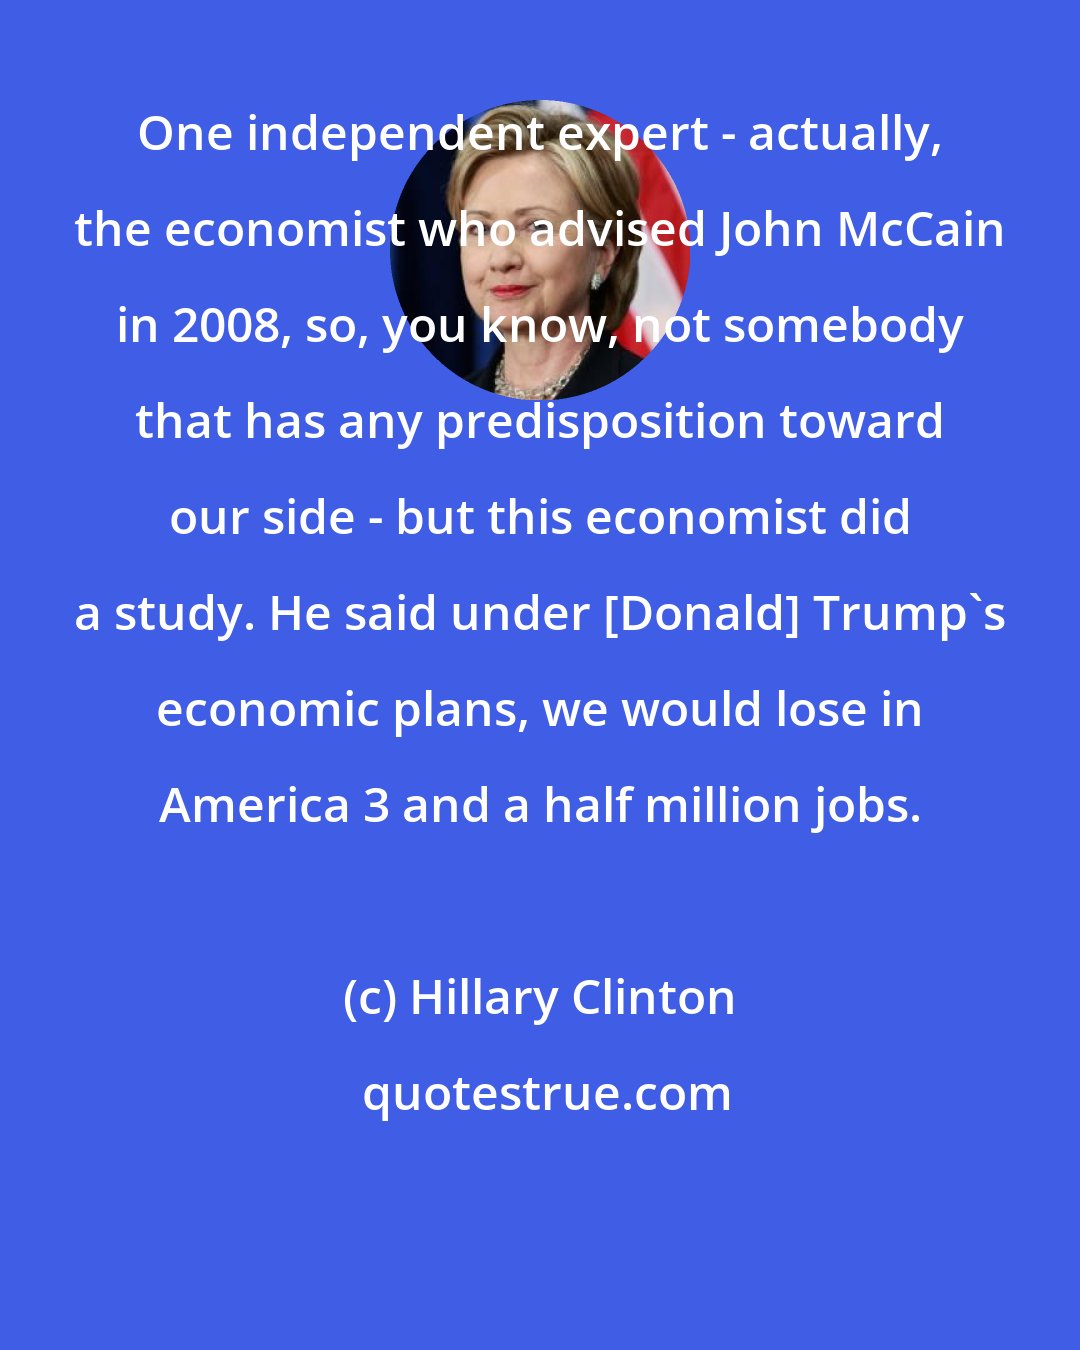 Hillary Clinton: One independent expert - actually, the economist who advised John McCain in 2008, so, you know, not somebody that has any predisposition toward our side - but this economist did a study. He said under [Donald] Trump's economic plans, we would lose in America 3 and a half million jobs.